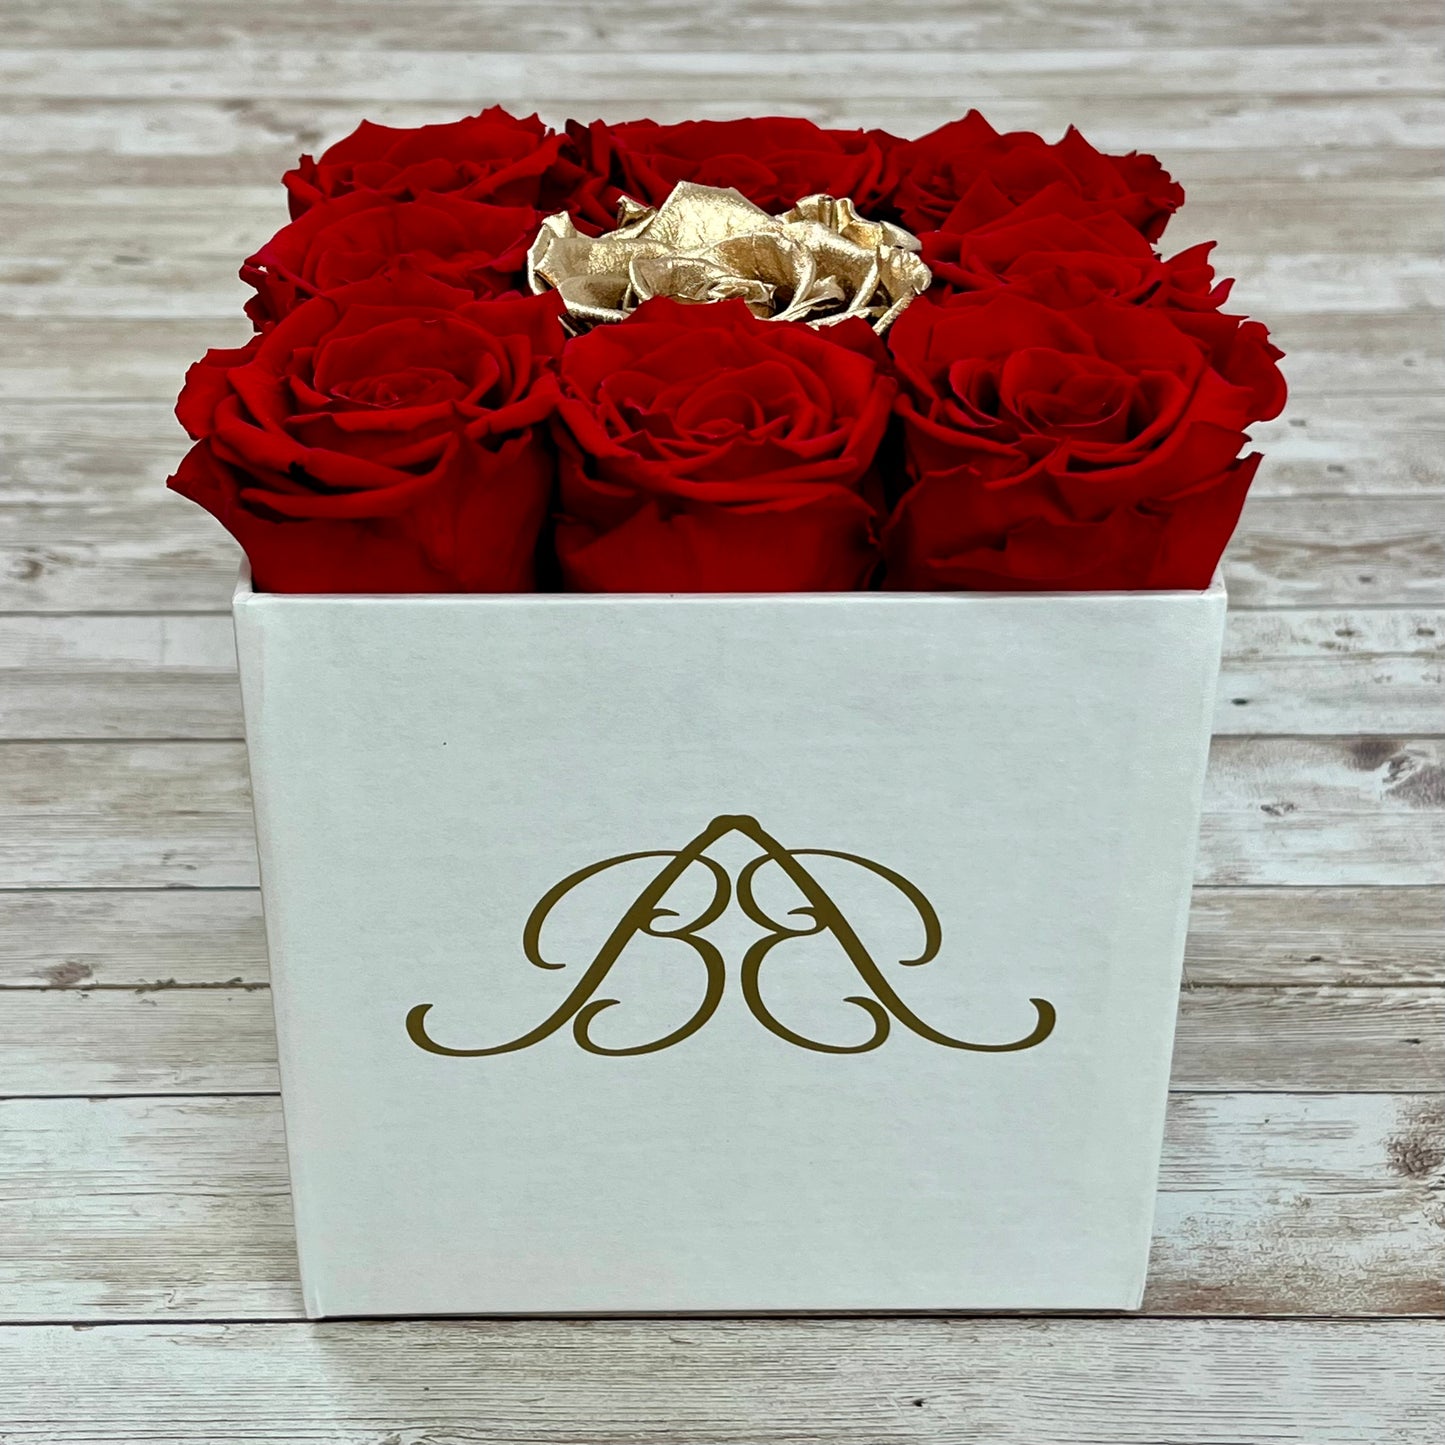 White Square Infinity Rose Box - Infinity Roses - Red & Gold One Year Roses - Square Box of Roses- Rose Colours divider-Red with Gold centre